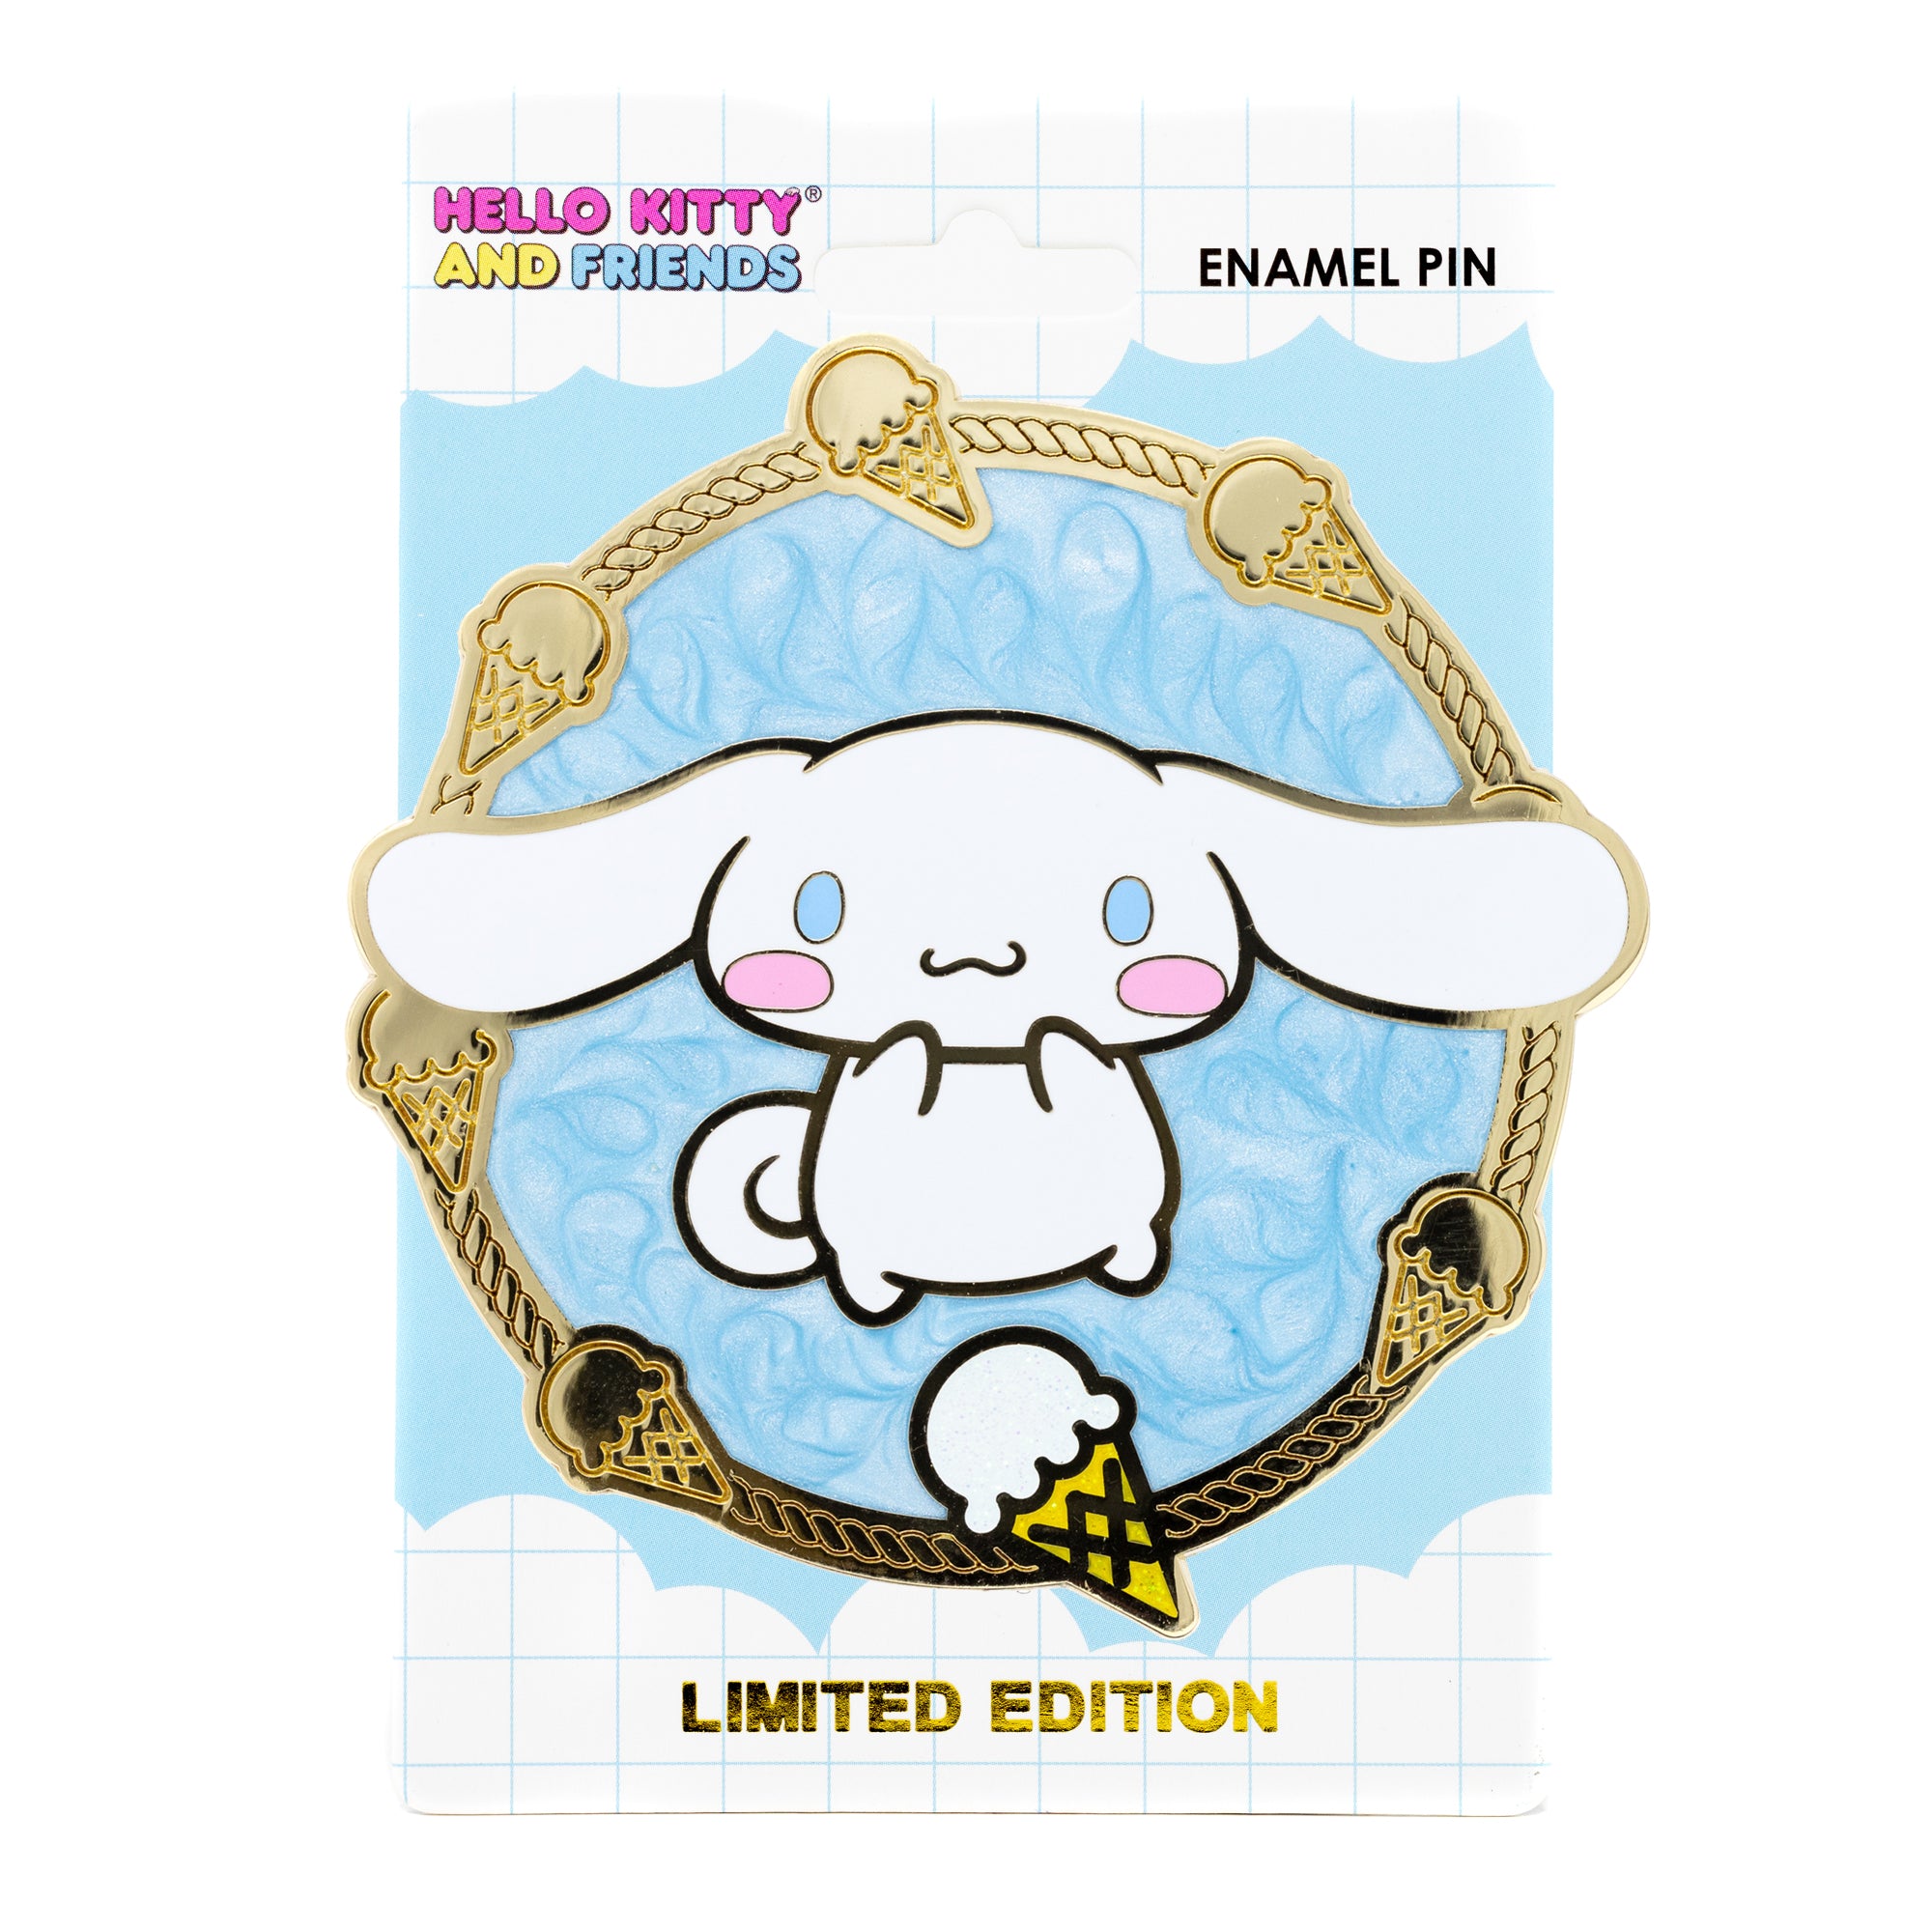 Sanrio Iconic Series - Cinnamoroll 3" Limited Edition 300 Pin - FINALSALE